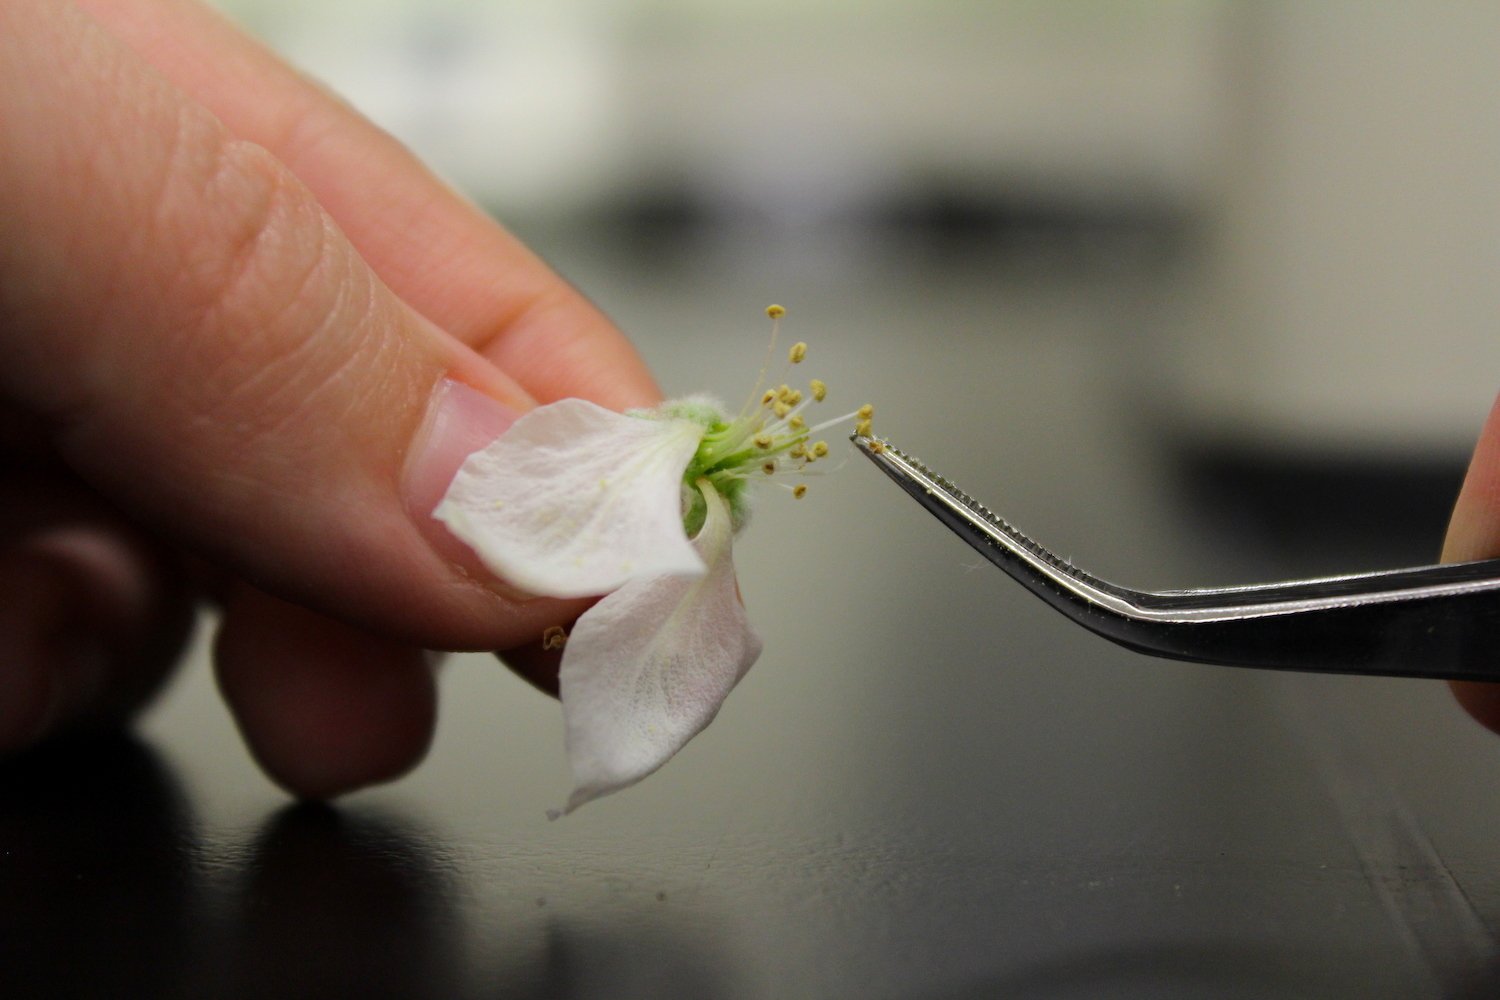 A member of Khan's team collects pollen from an apple flower at the the Cornell AgriTech lab in Geneva, New York. July 2021